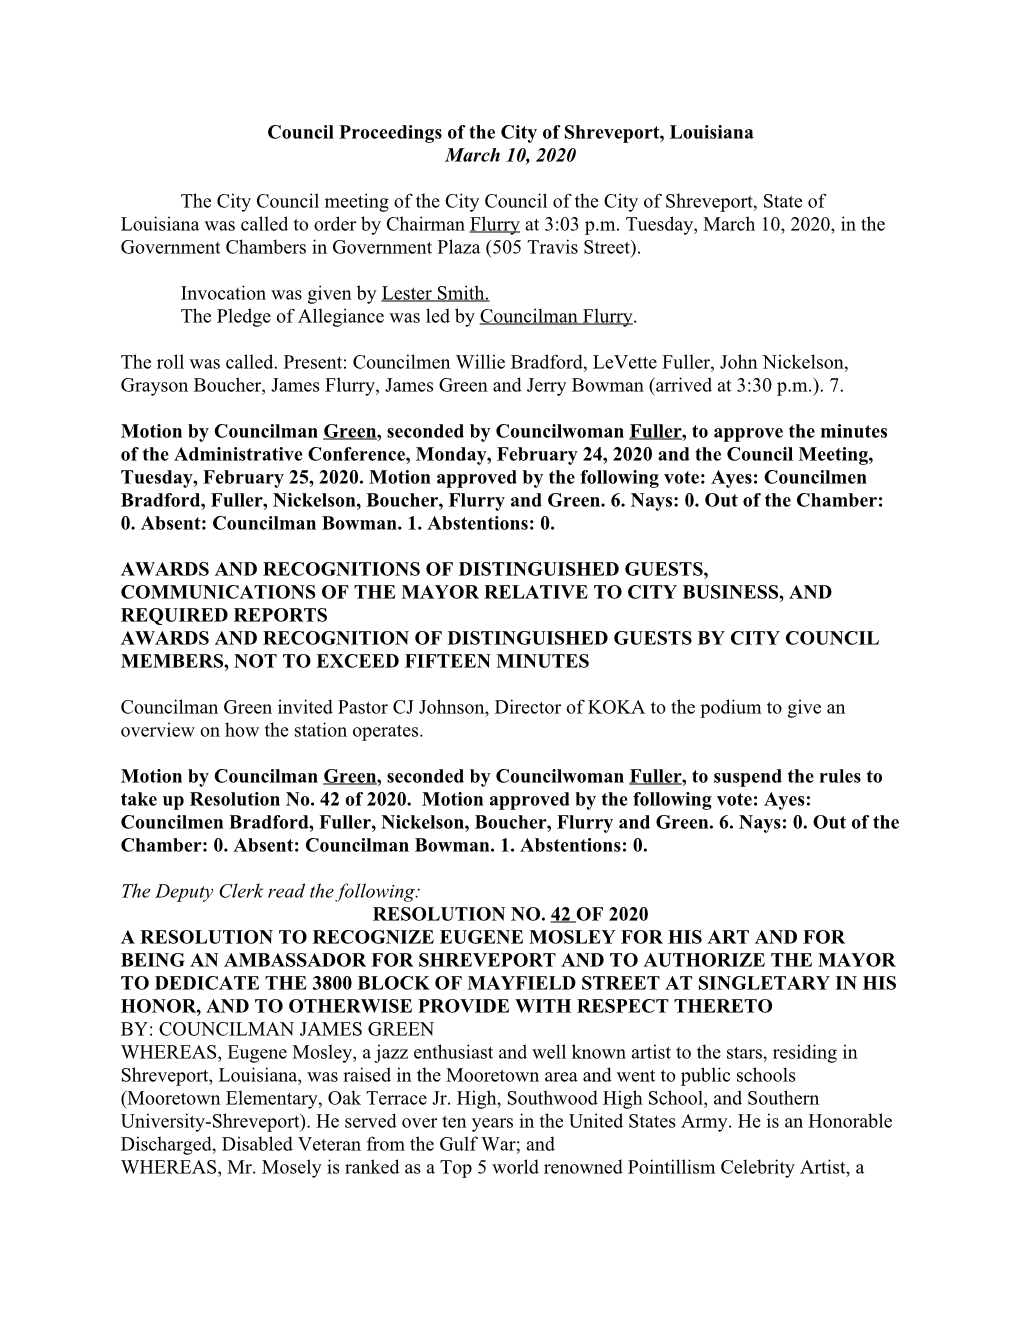 Council Proceedings of the City of Shreveport, Louisiana March 10, 2020